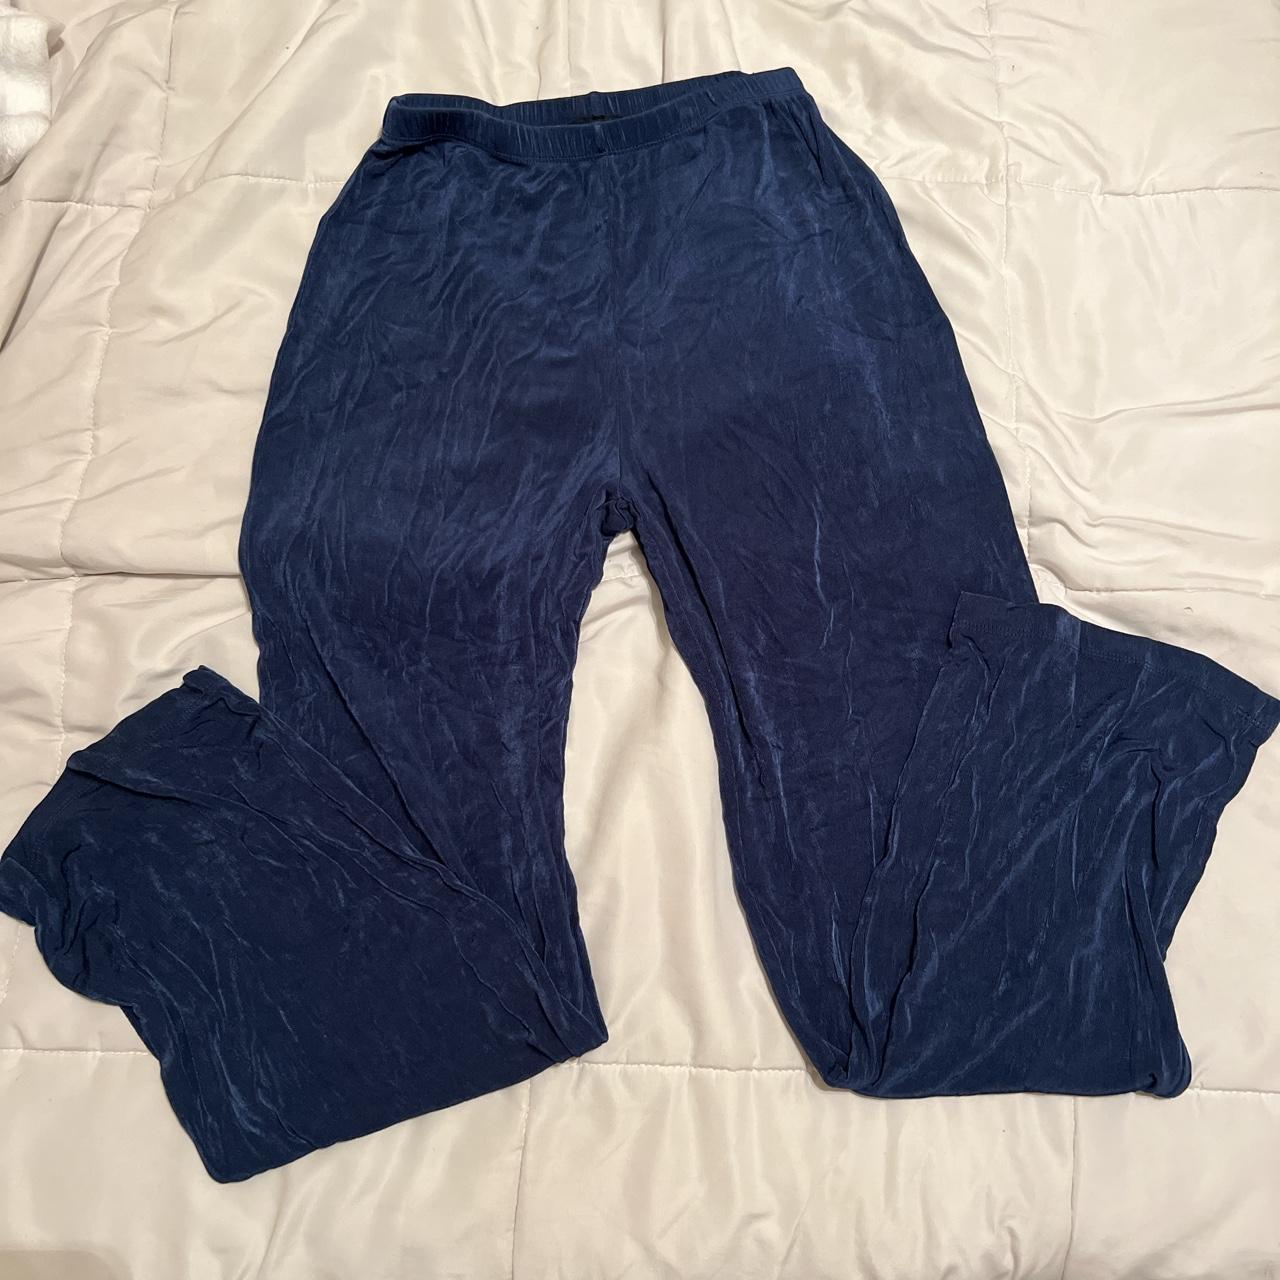 item listed by ourrcloset